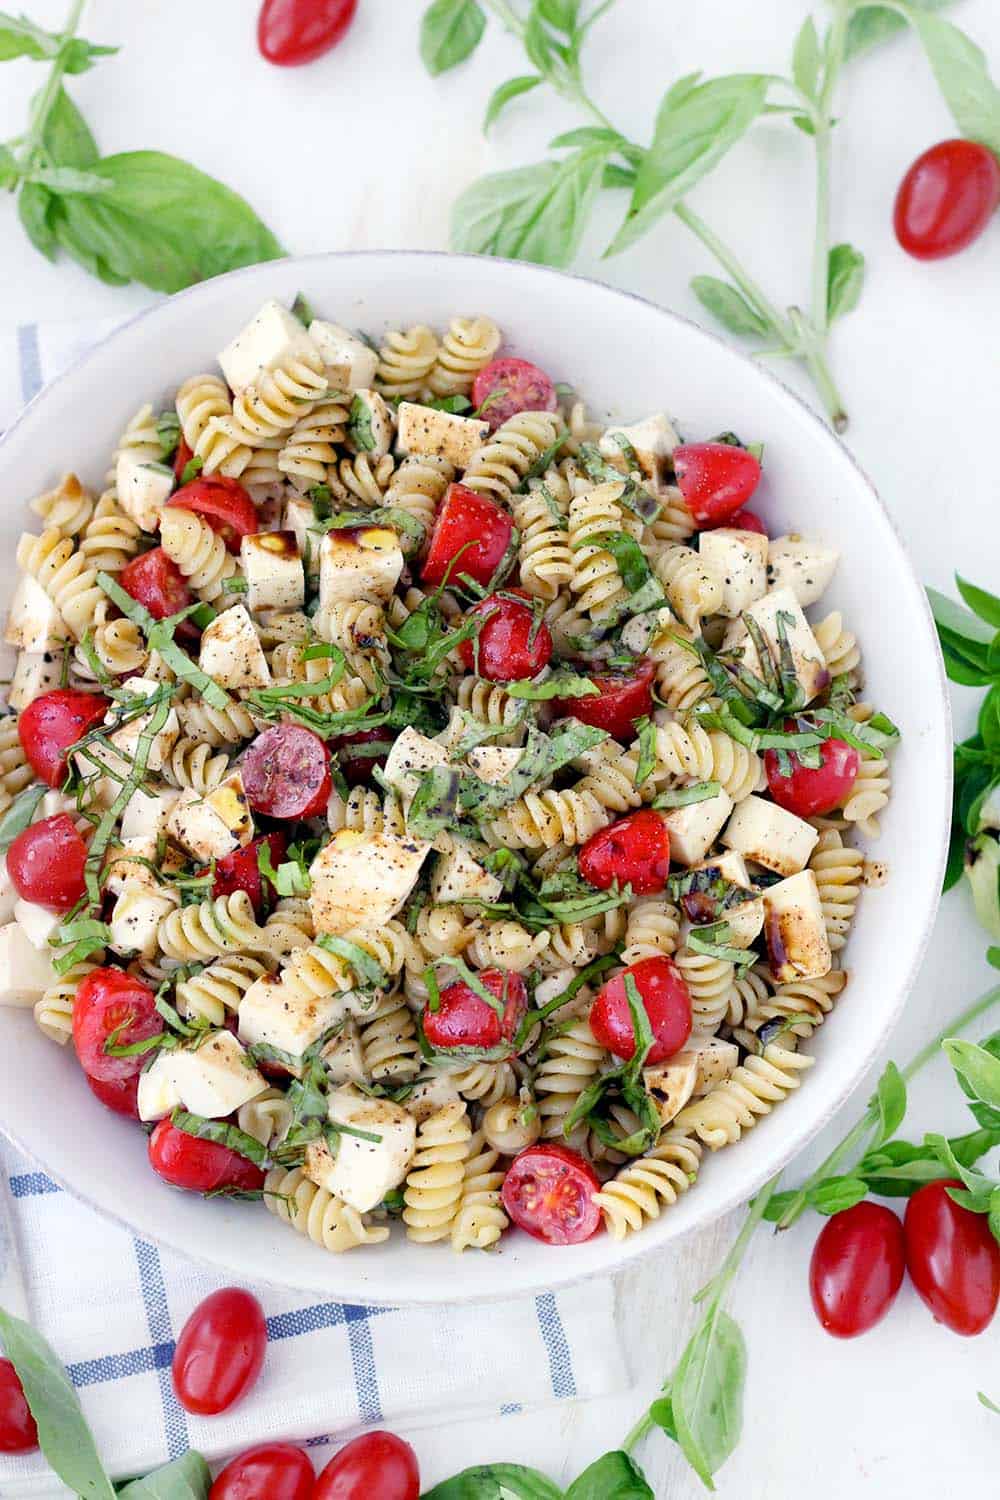 This fast and easy Caprese Pasta Salad recipe is coated in a light, creamy balsamic and olive oil dressing. A great vegetarian weeknight dinner, or add grilled chicken to make it more hearty.